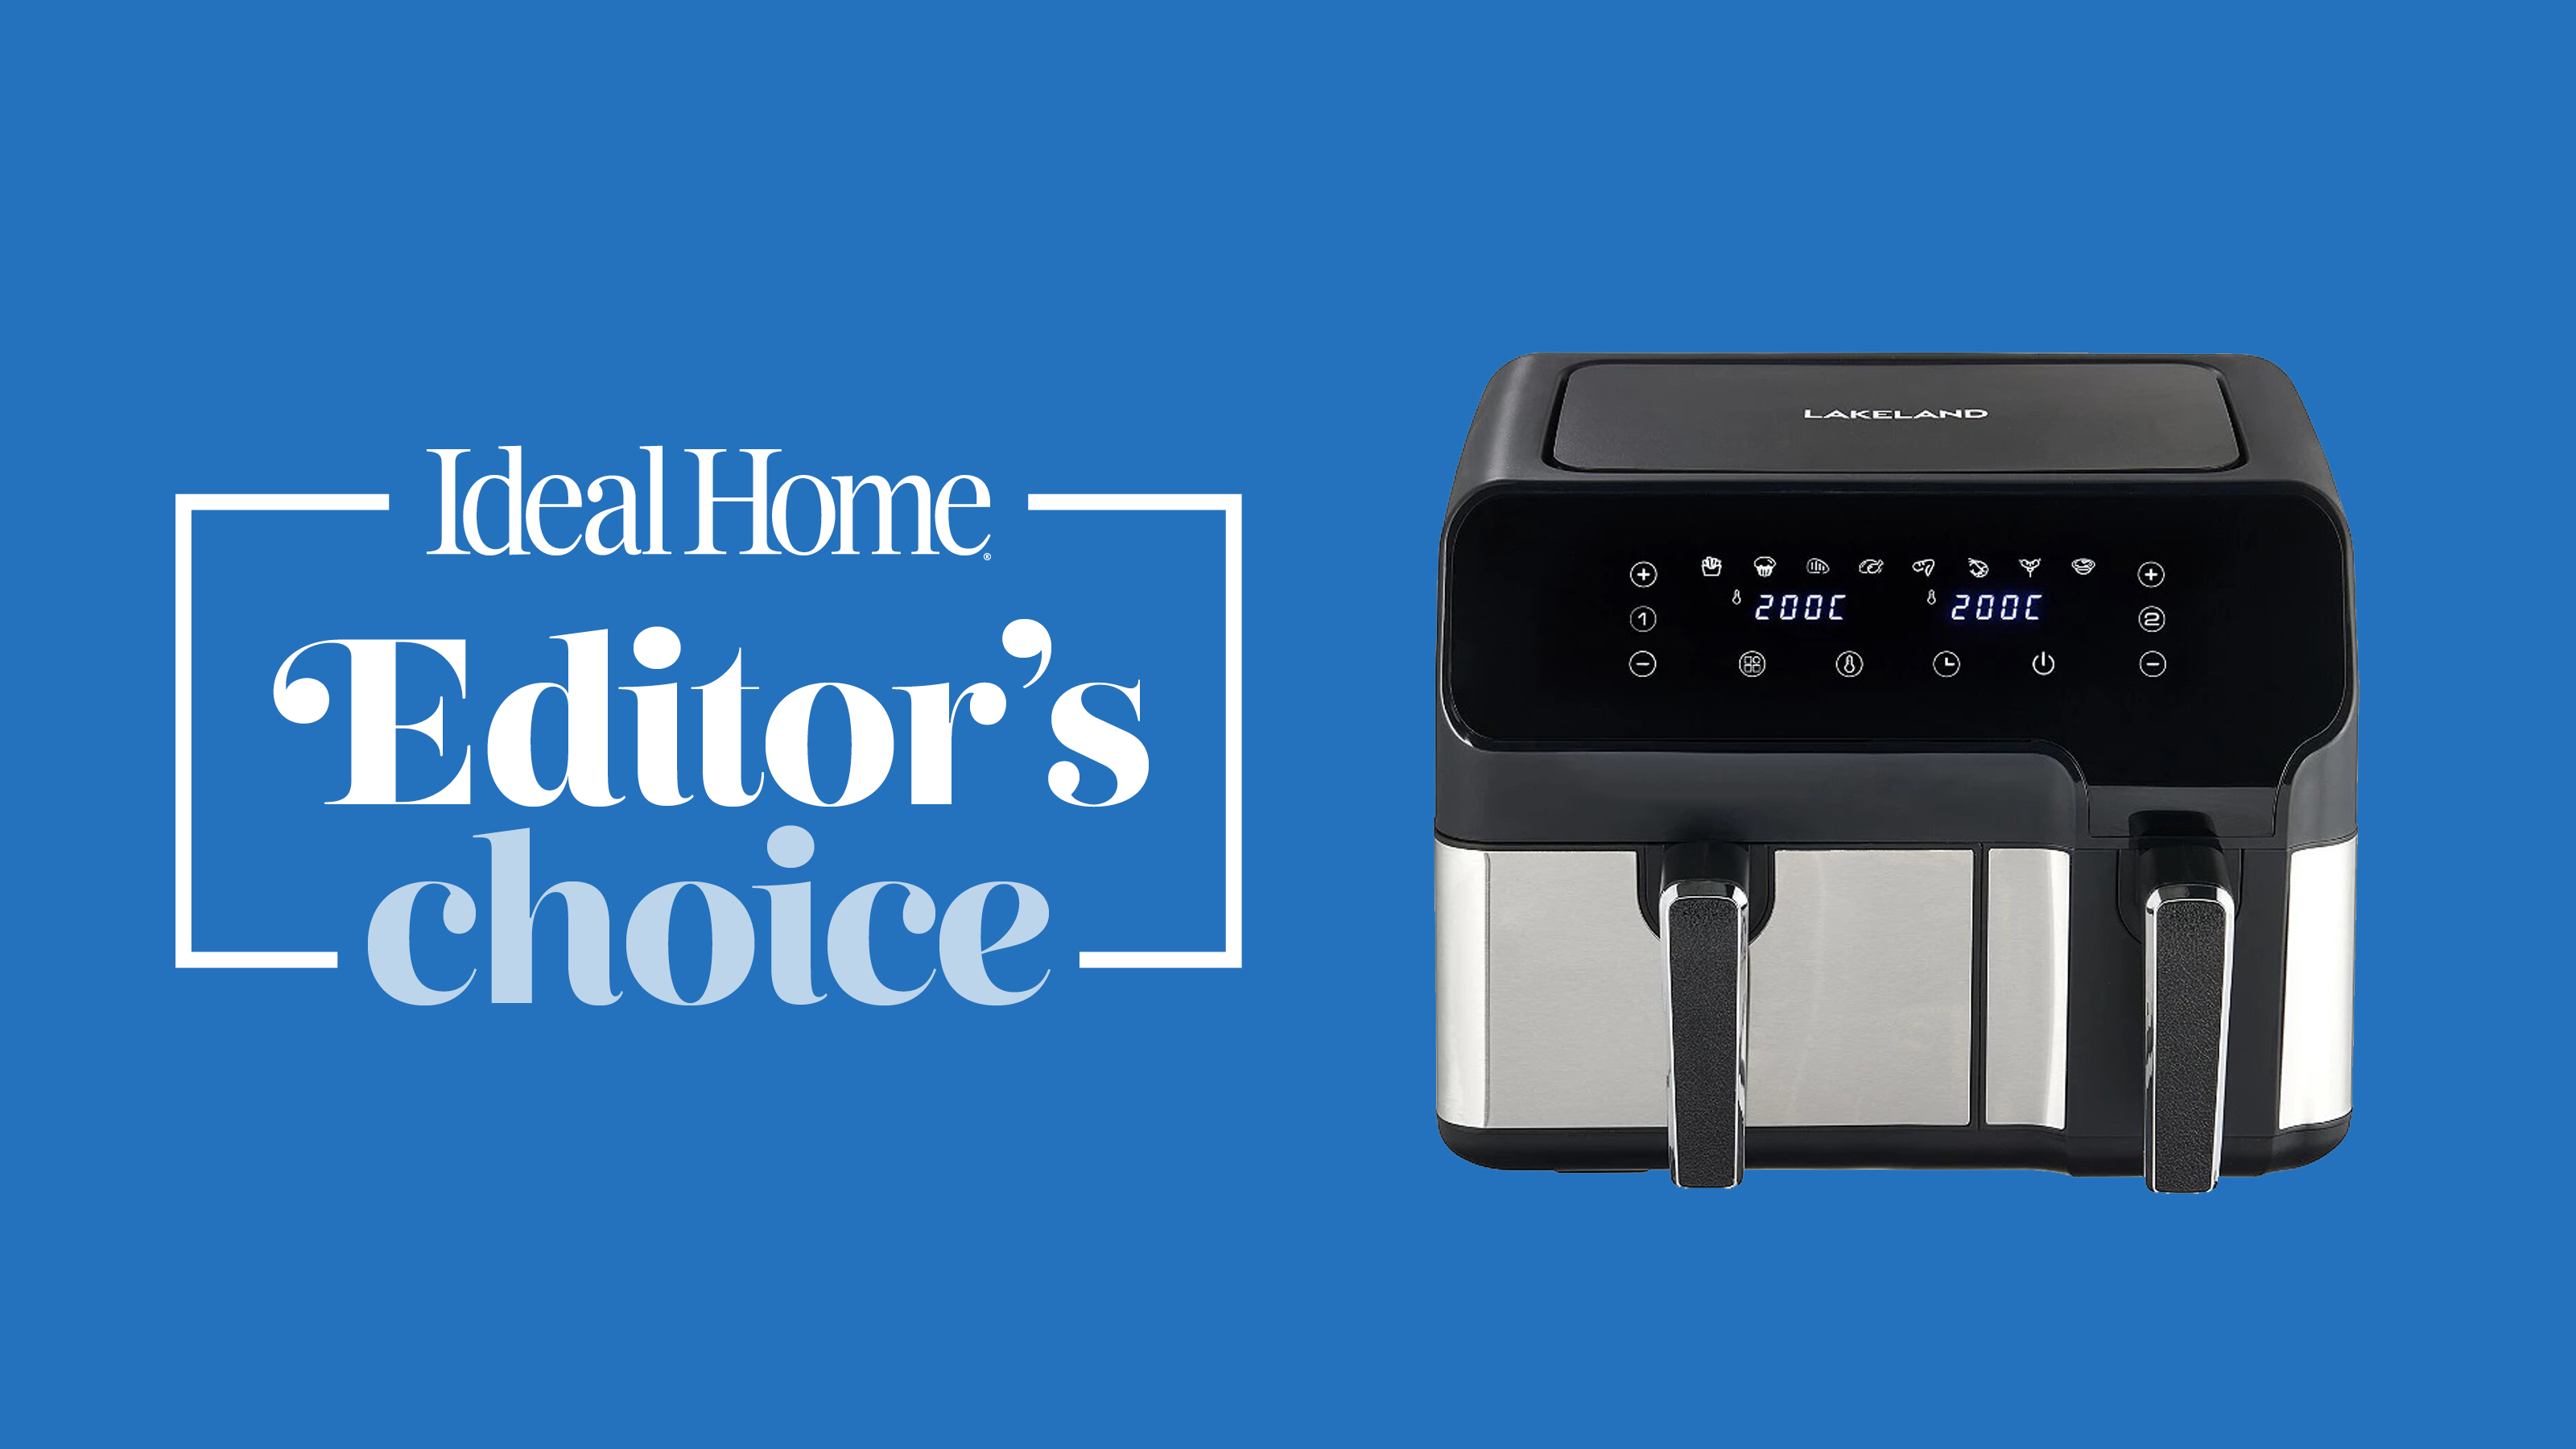 Image of Lakeland air fryer on editor's choice background